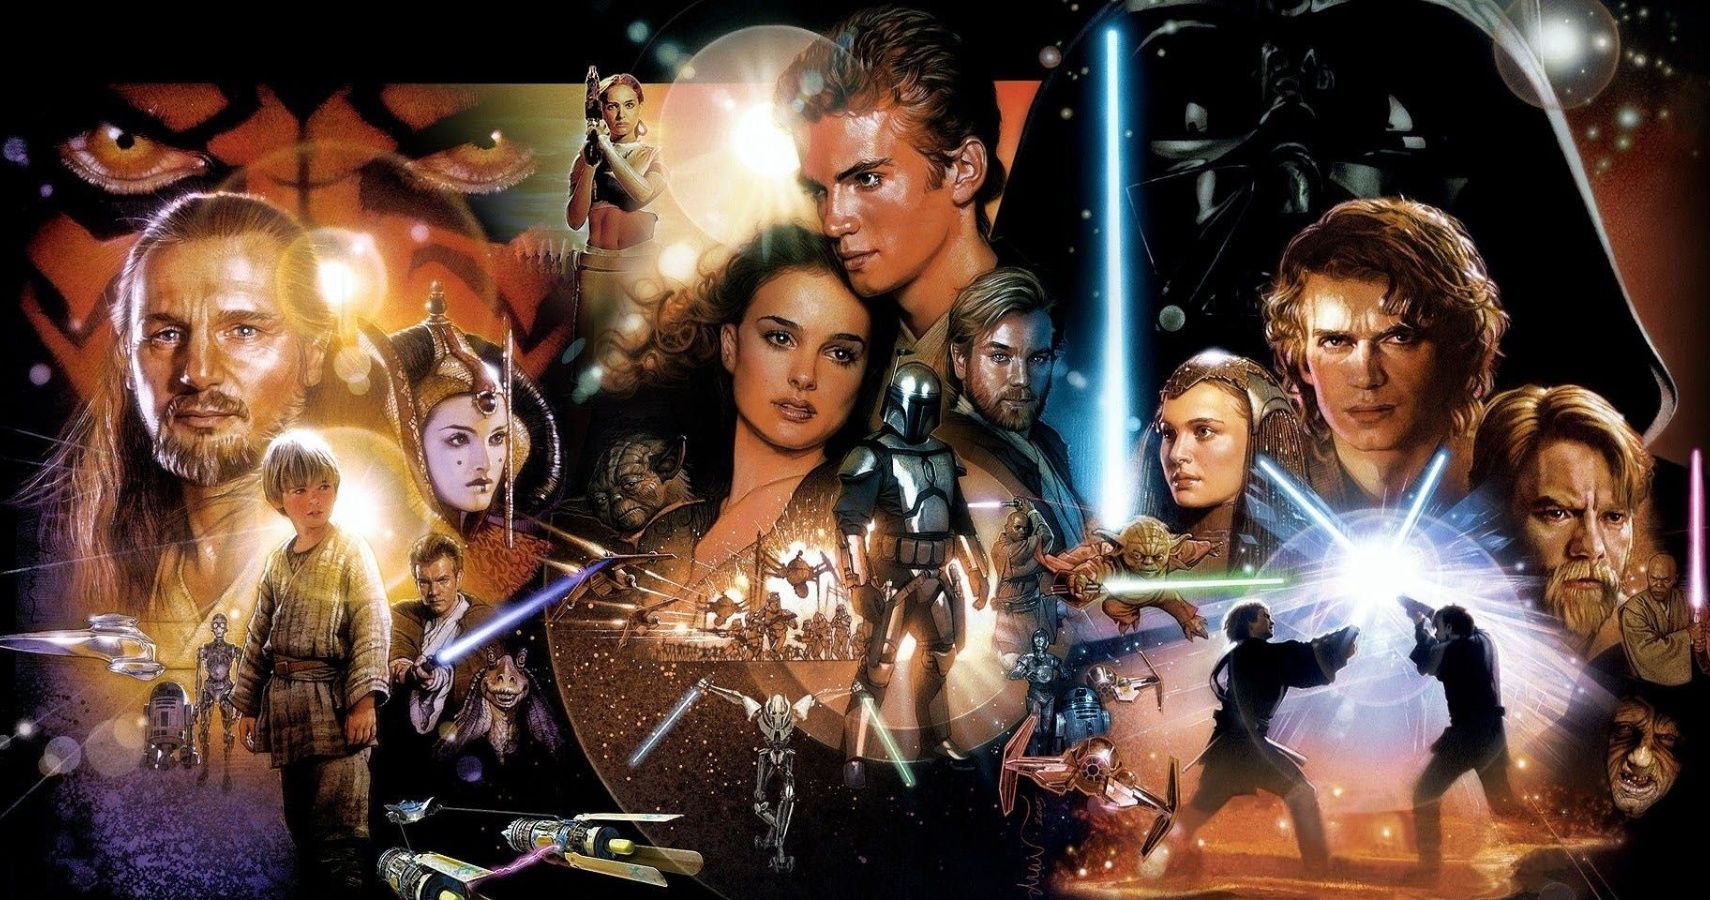 Posters for the Star Wars prequel trilogy.